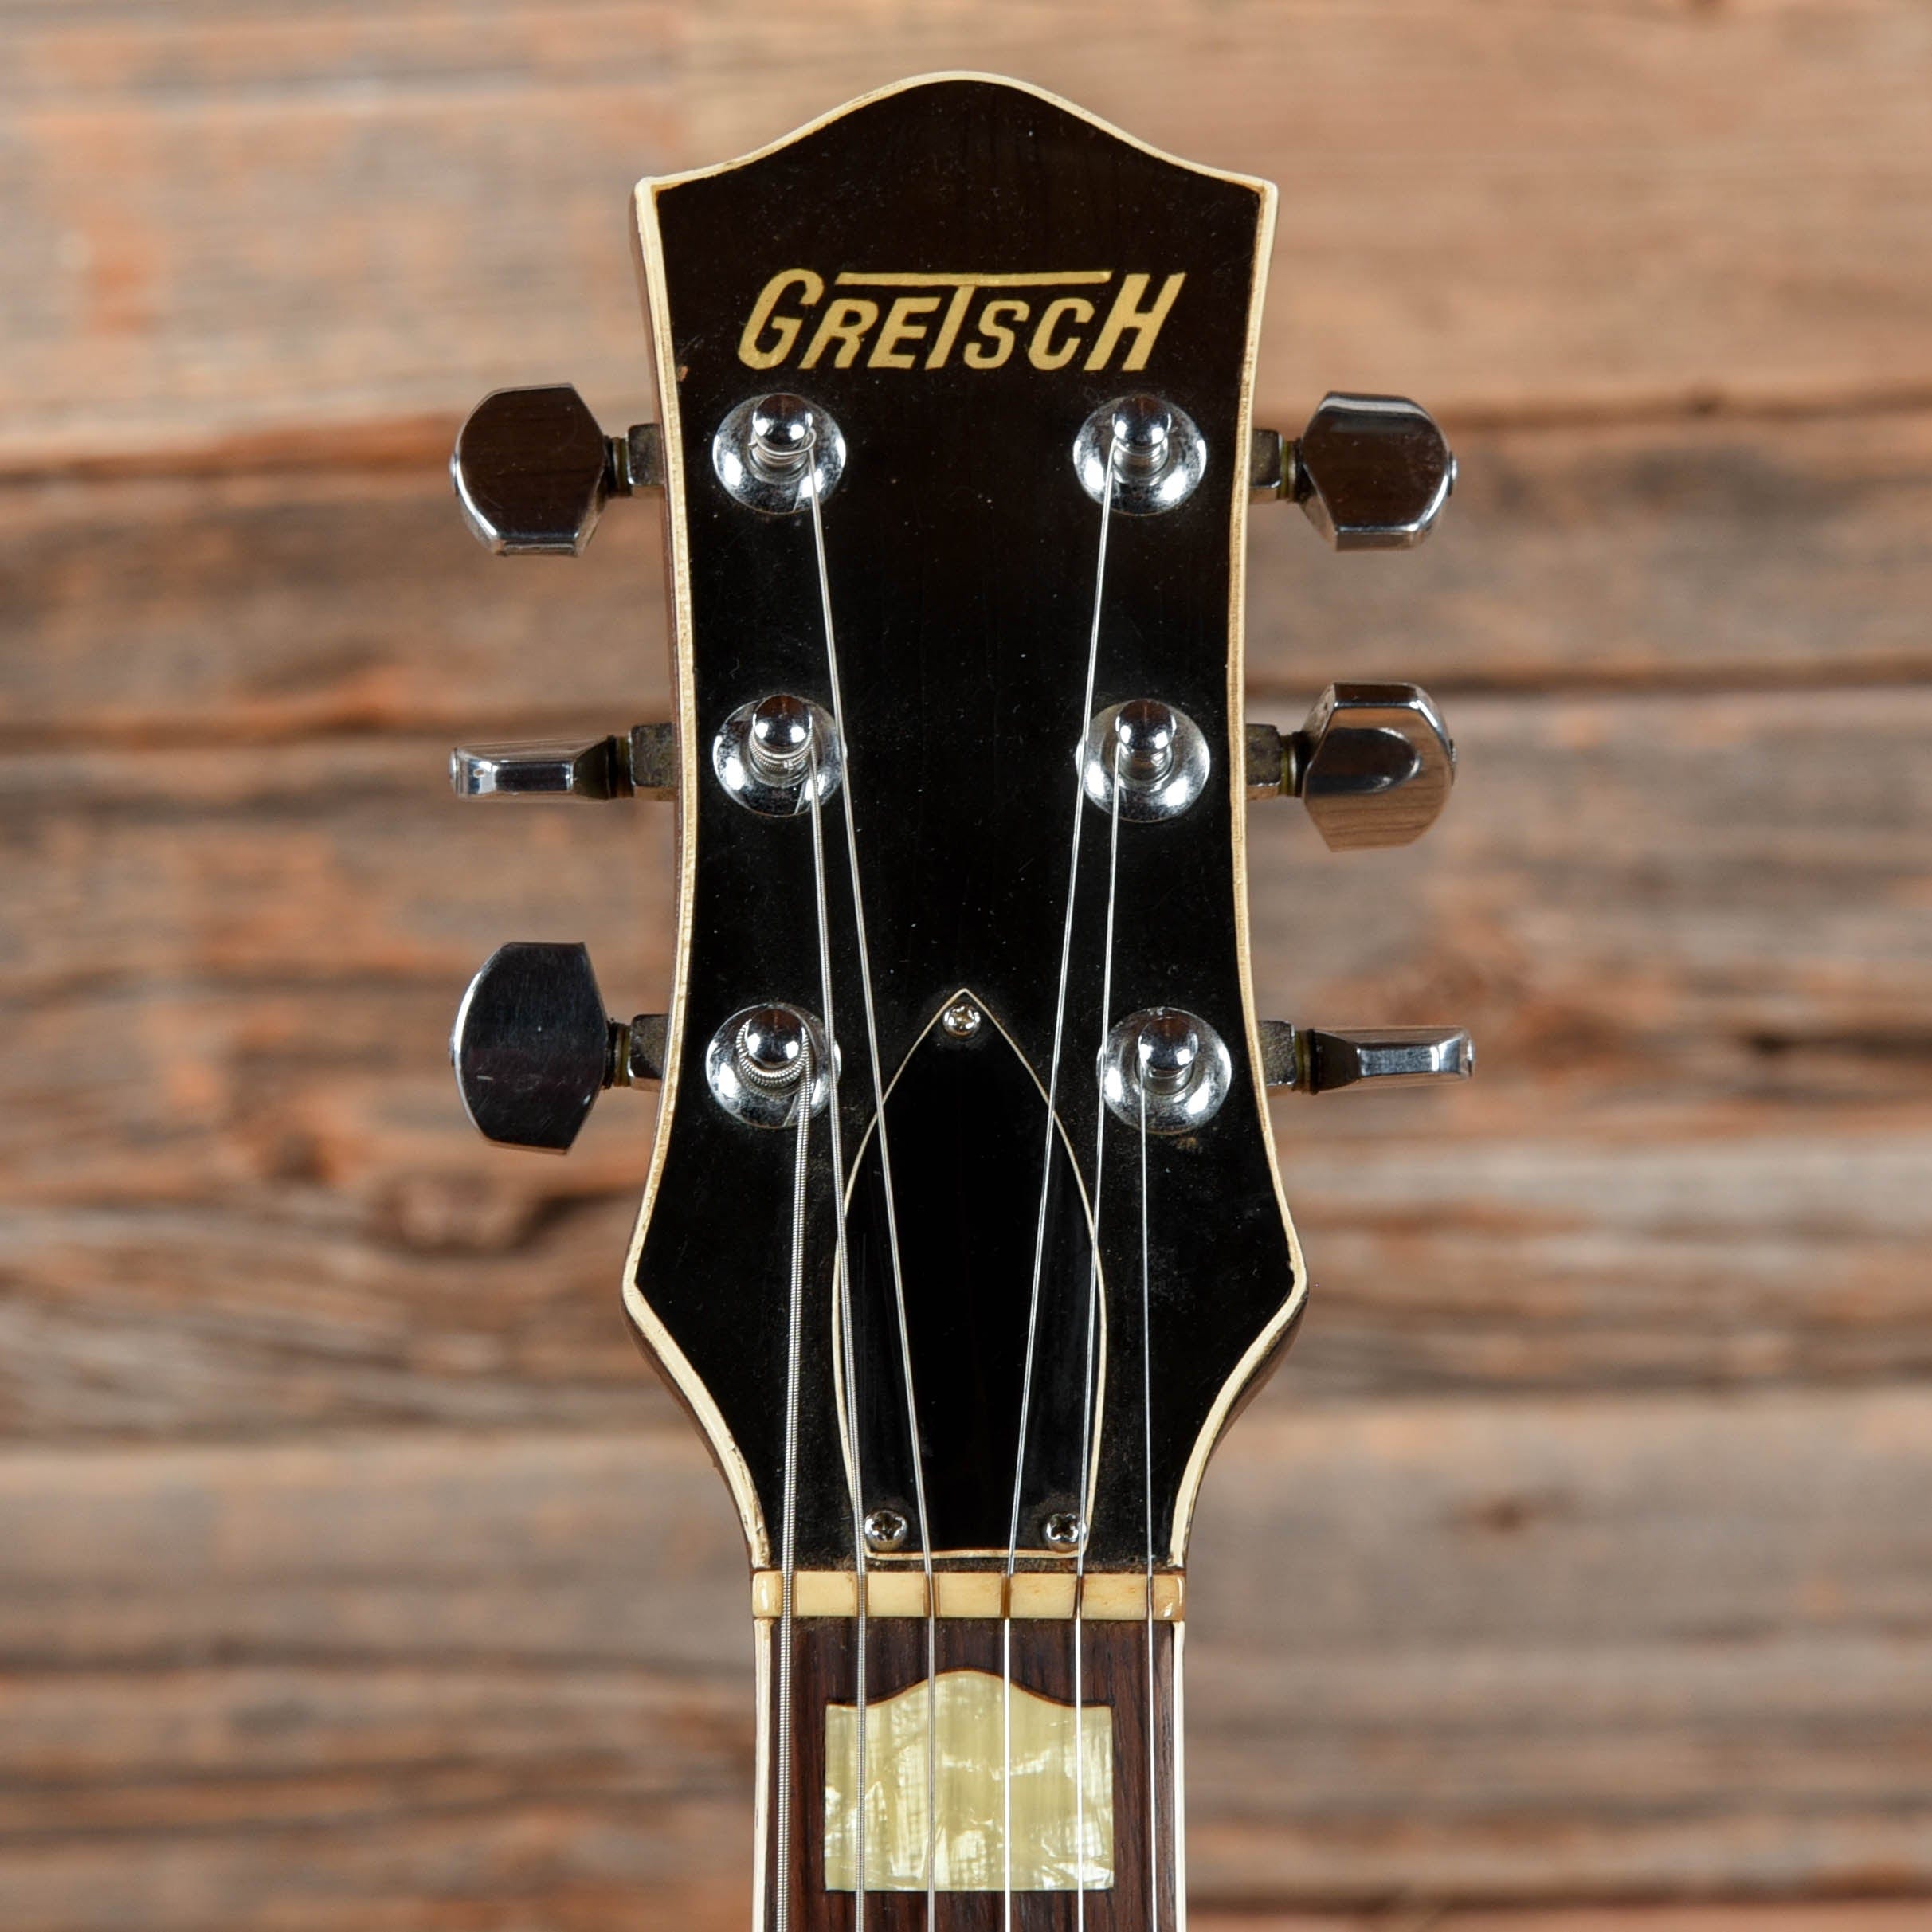 Gretsch 6128 Duo Jet Black 1957 Electric Guitars / Solid Body